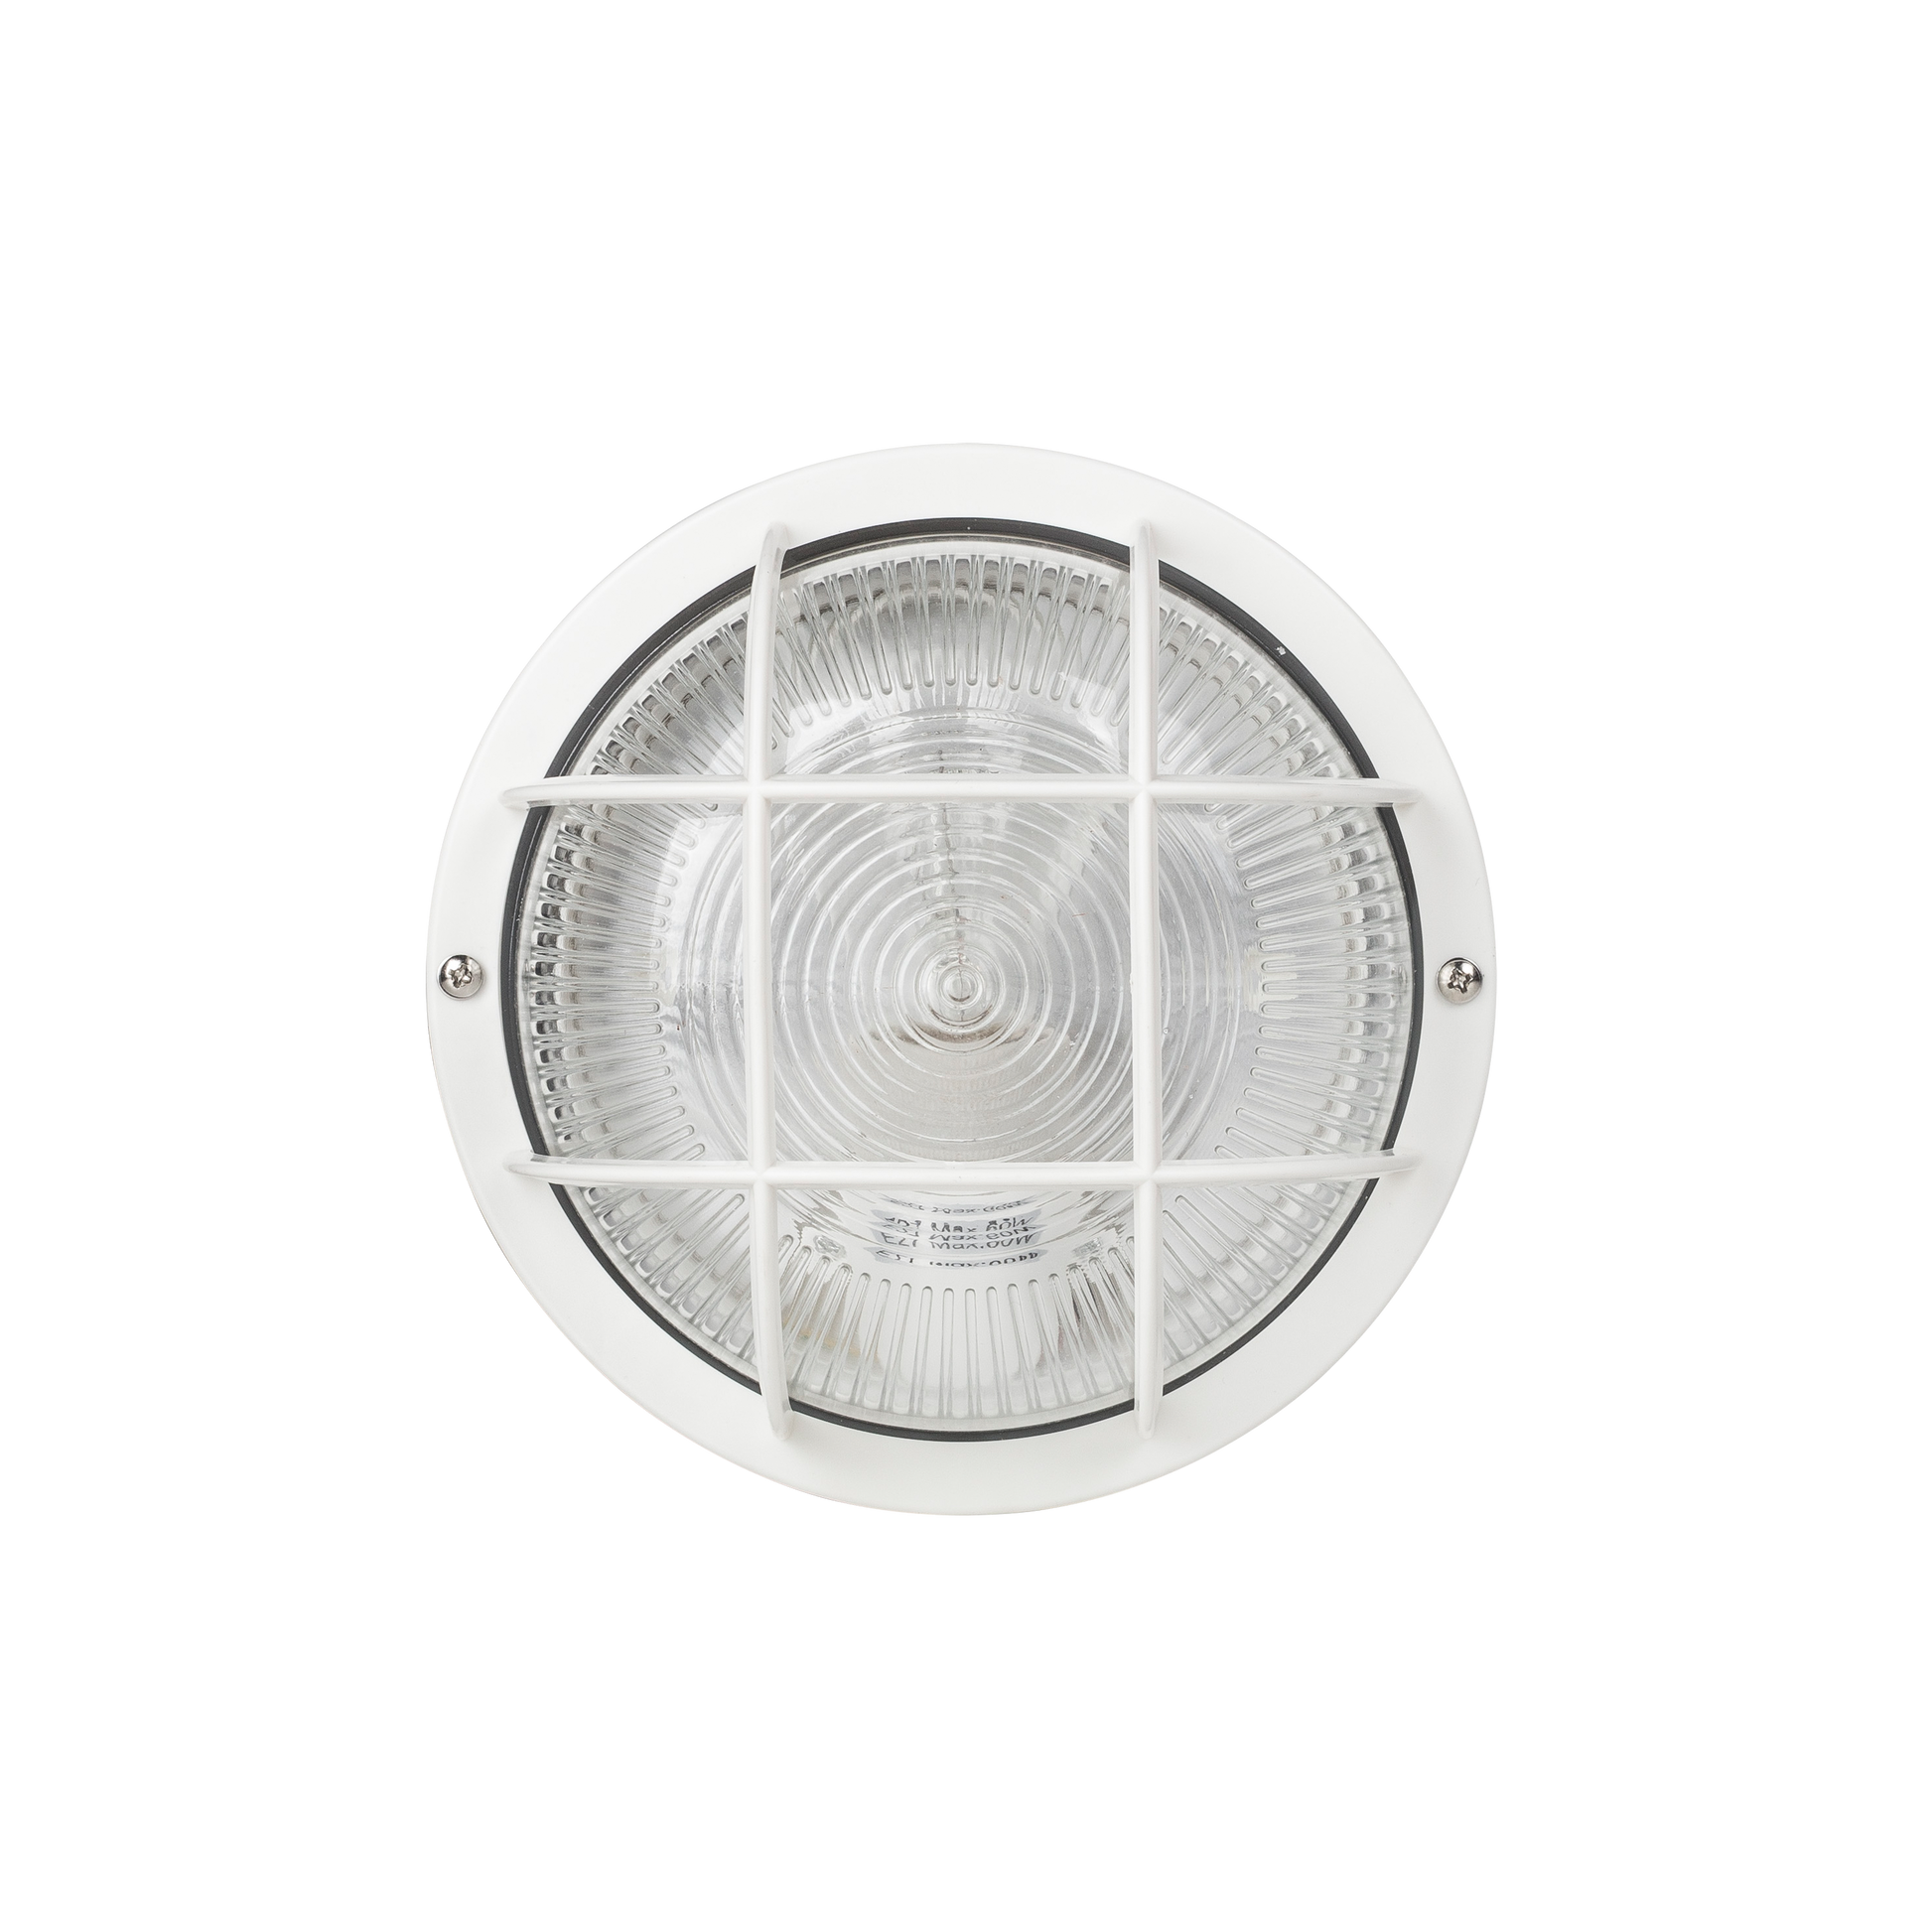 ROUND CEILING LIGHT WITH PLASTIC CAGE WHITE D18.5 E27=60W IP44